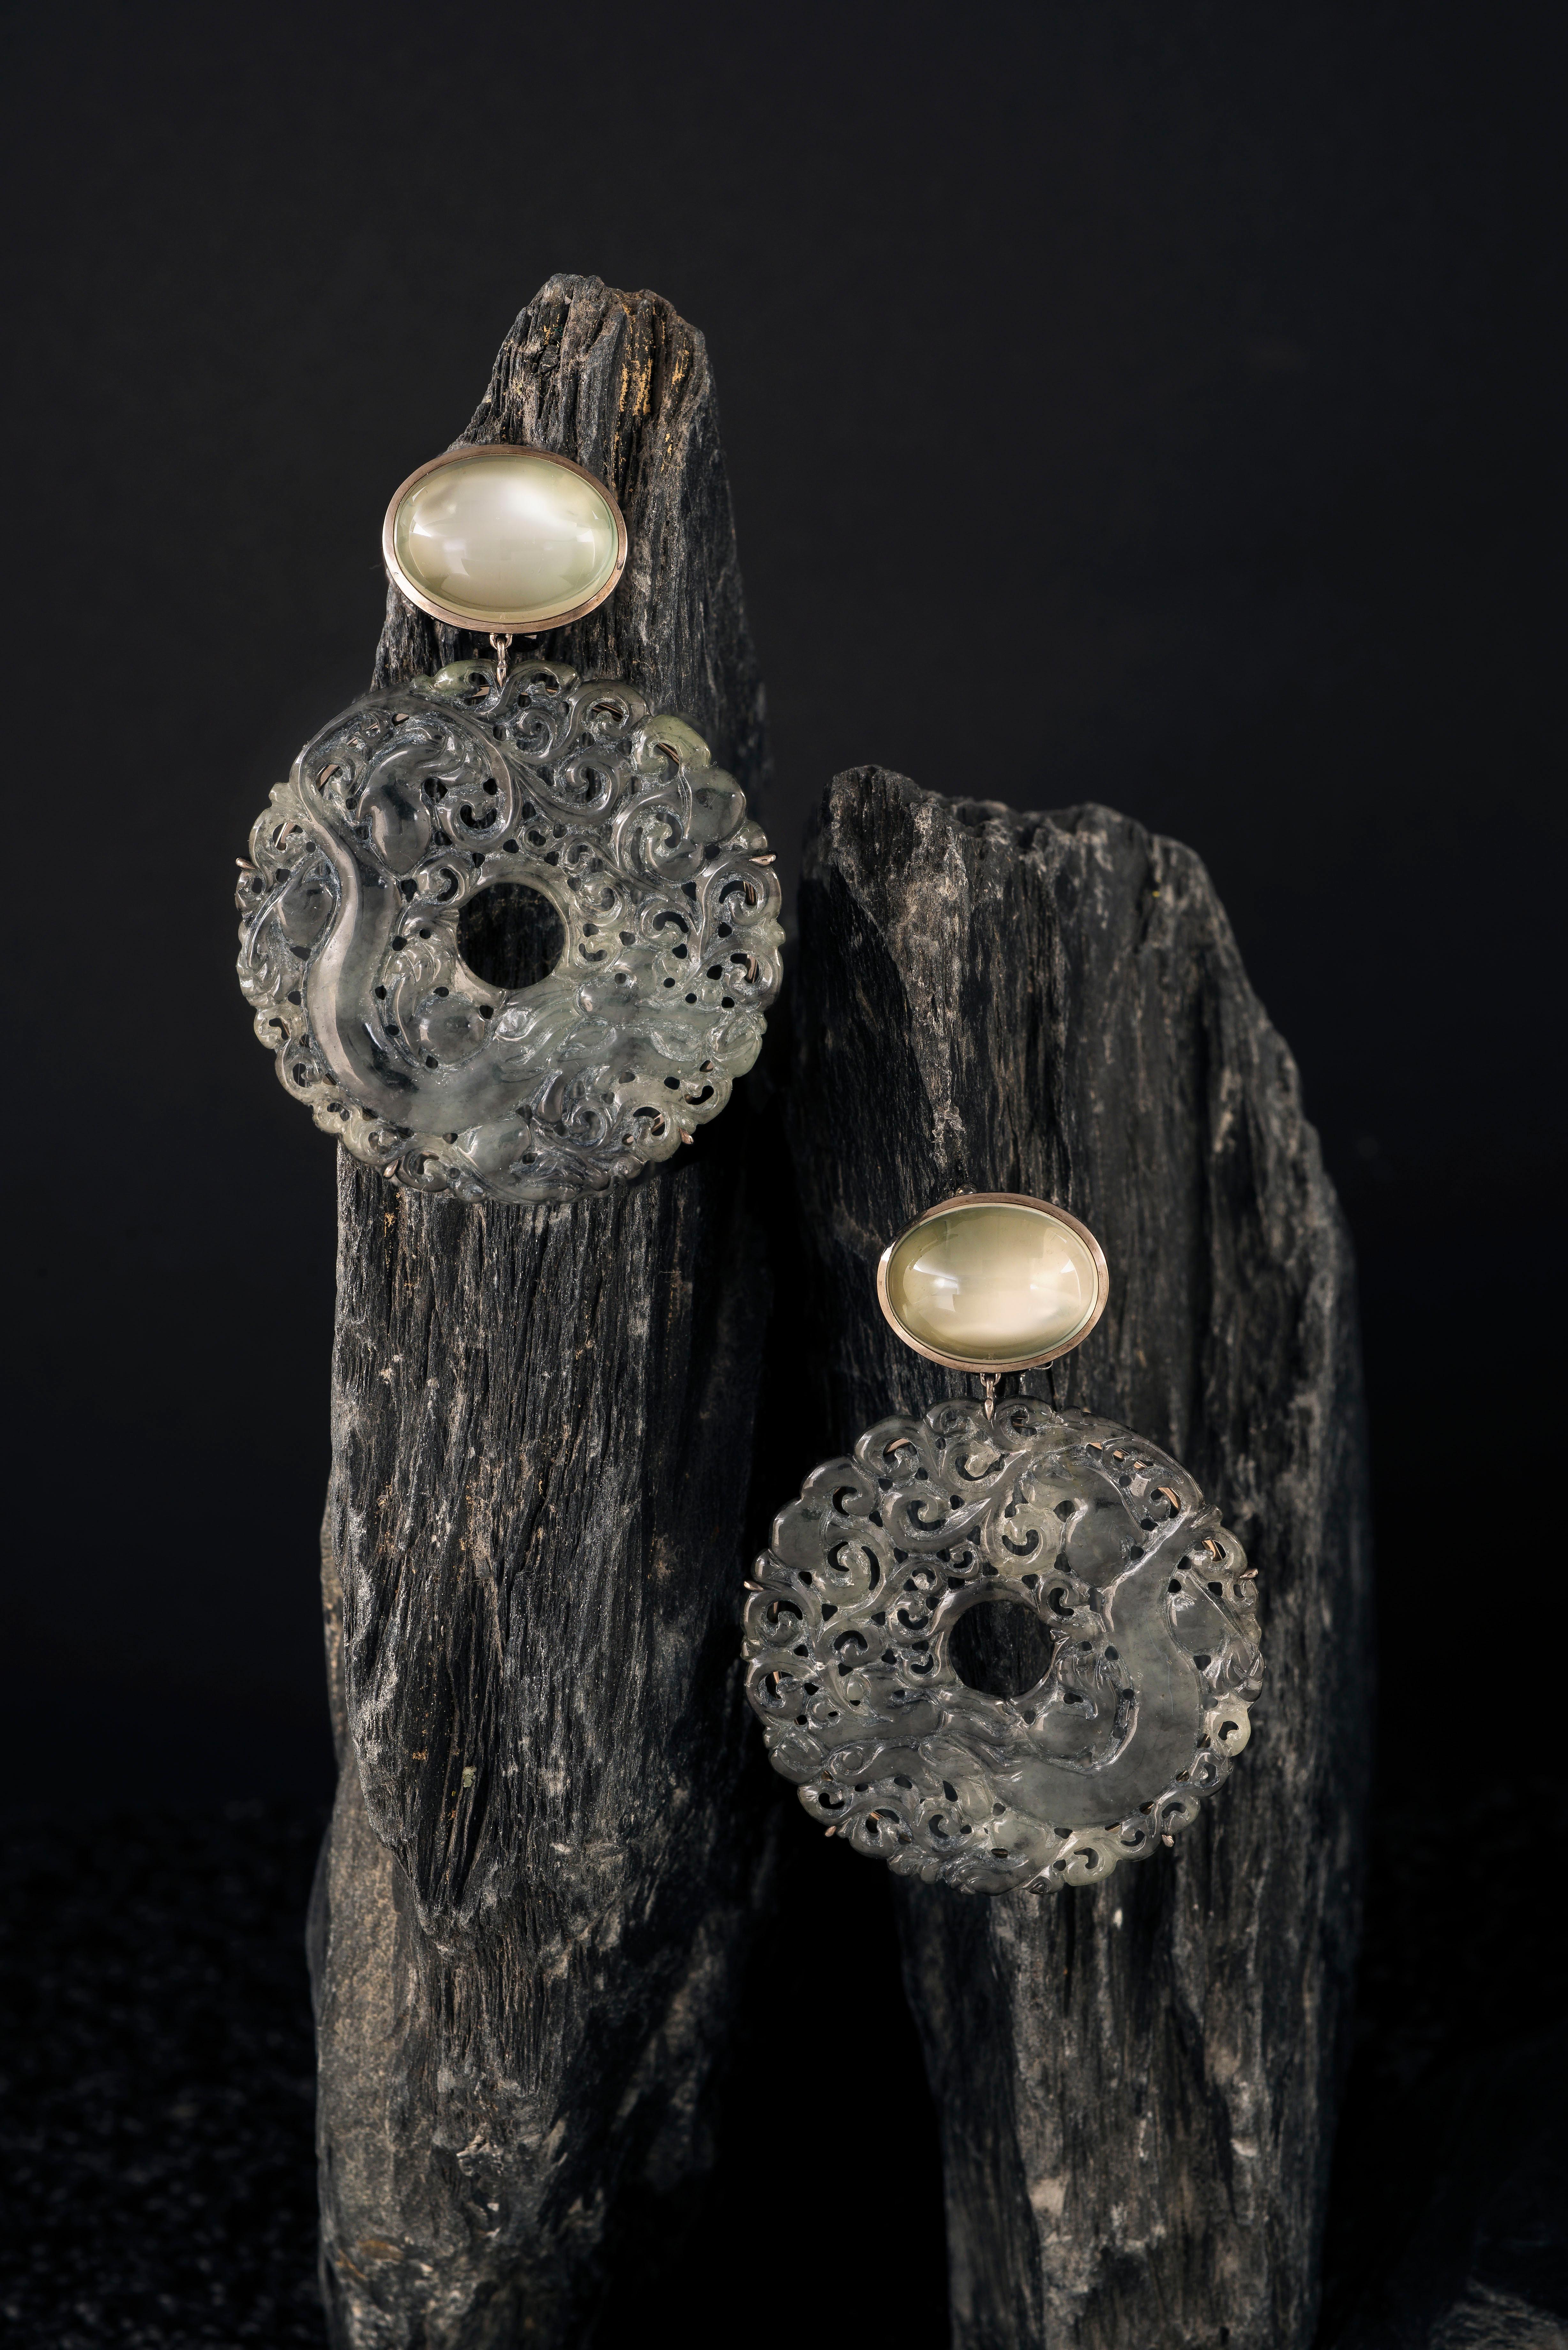 These one-off earrings are handmade in Switzerland. The black and white Jade discs are hand carved by a traditional manufacturer. The carved dragon is a symbol of luck. The earrings are made in 18K white gold and black rhodium with two oval cabochon